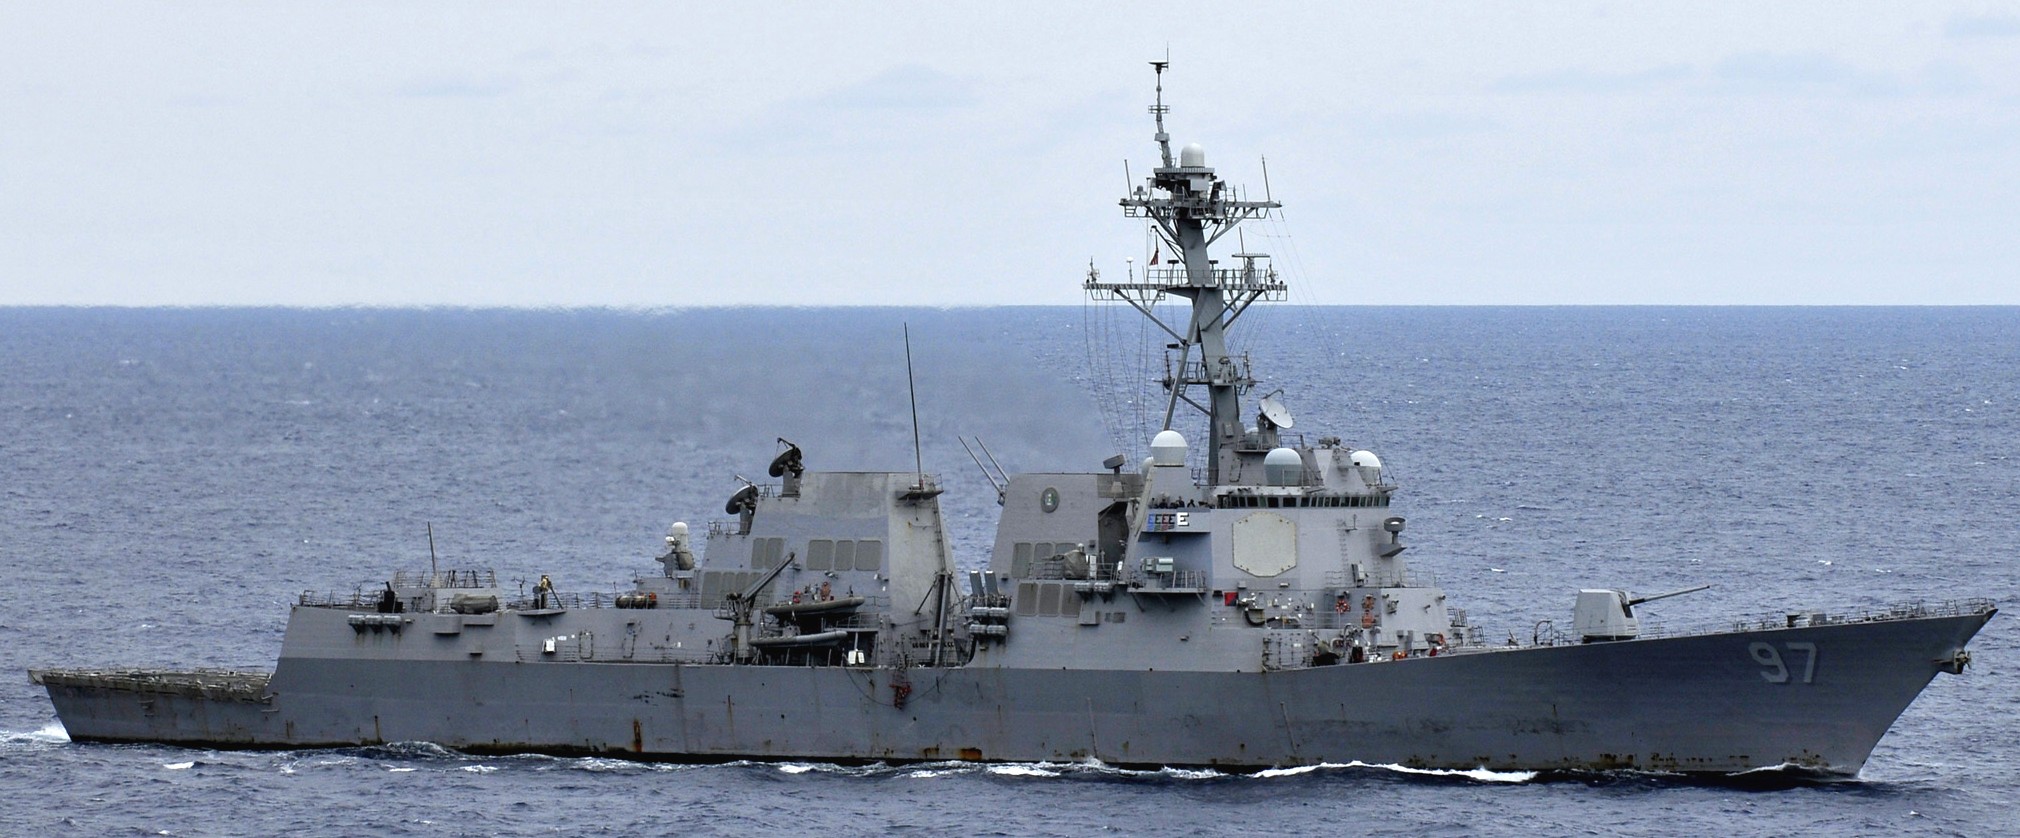 ddg-97 uss halsey arleigh burke class guided missile destroyer exercise malabar bay bengal 2012 15